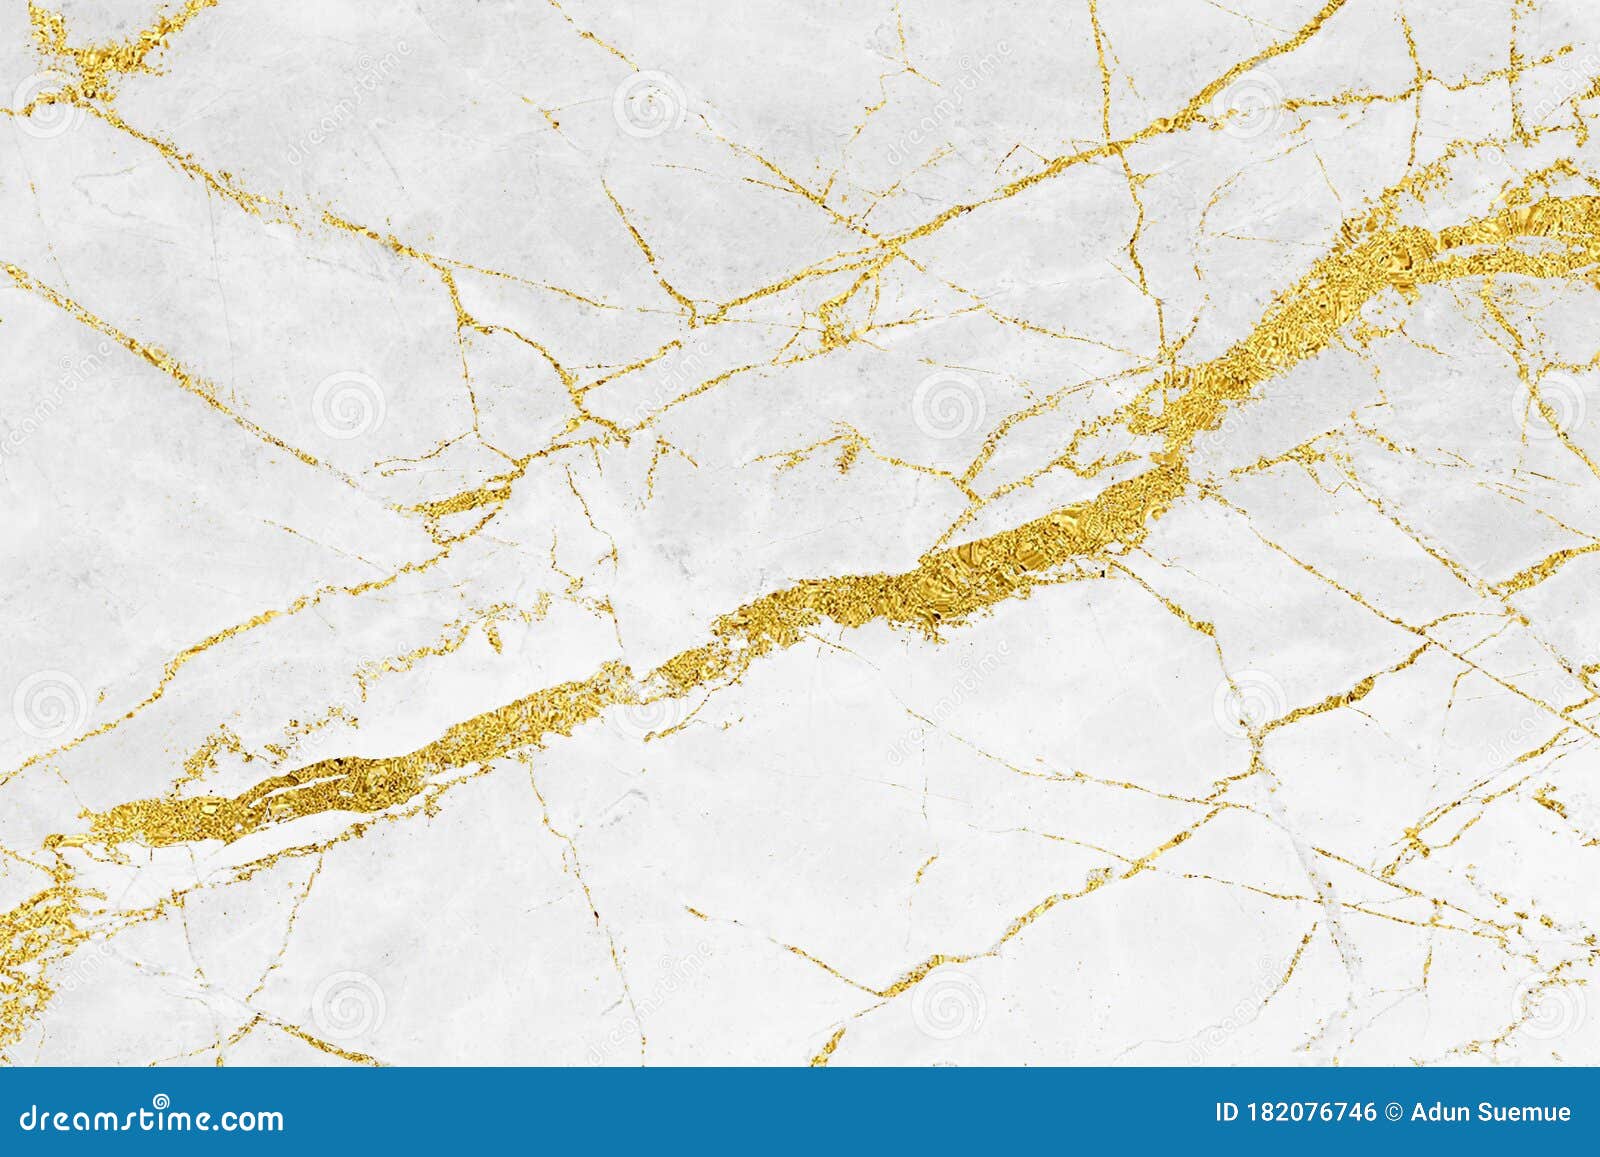 Gold Marble And Crystal: Materials That Define Luxury Design